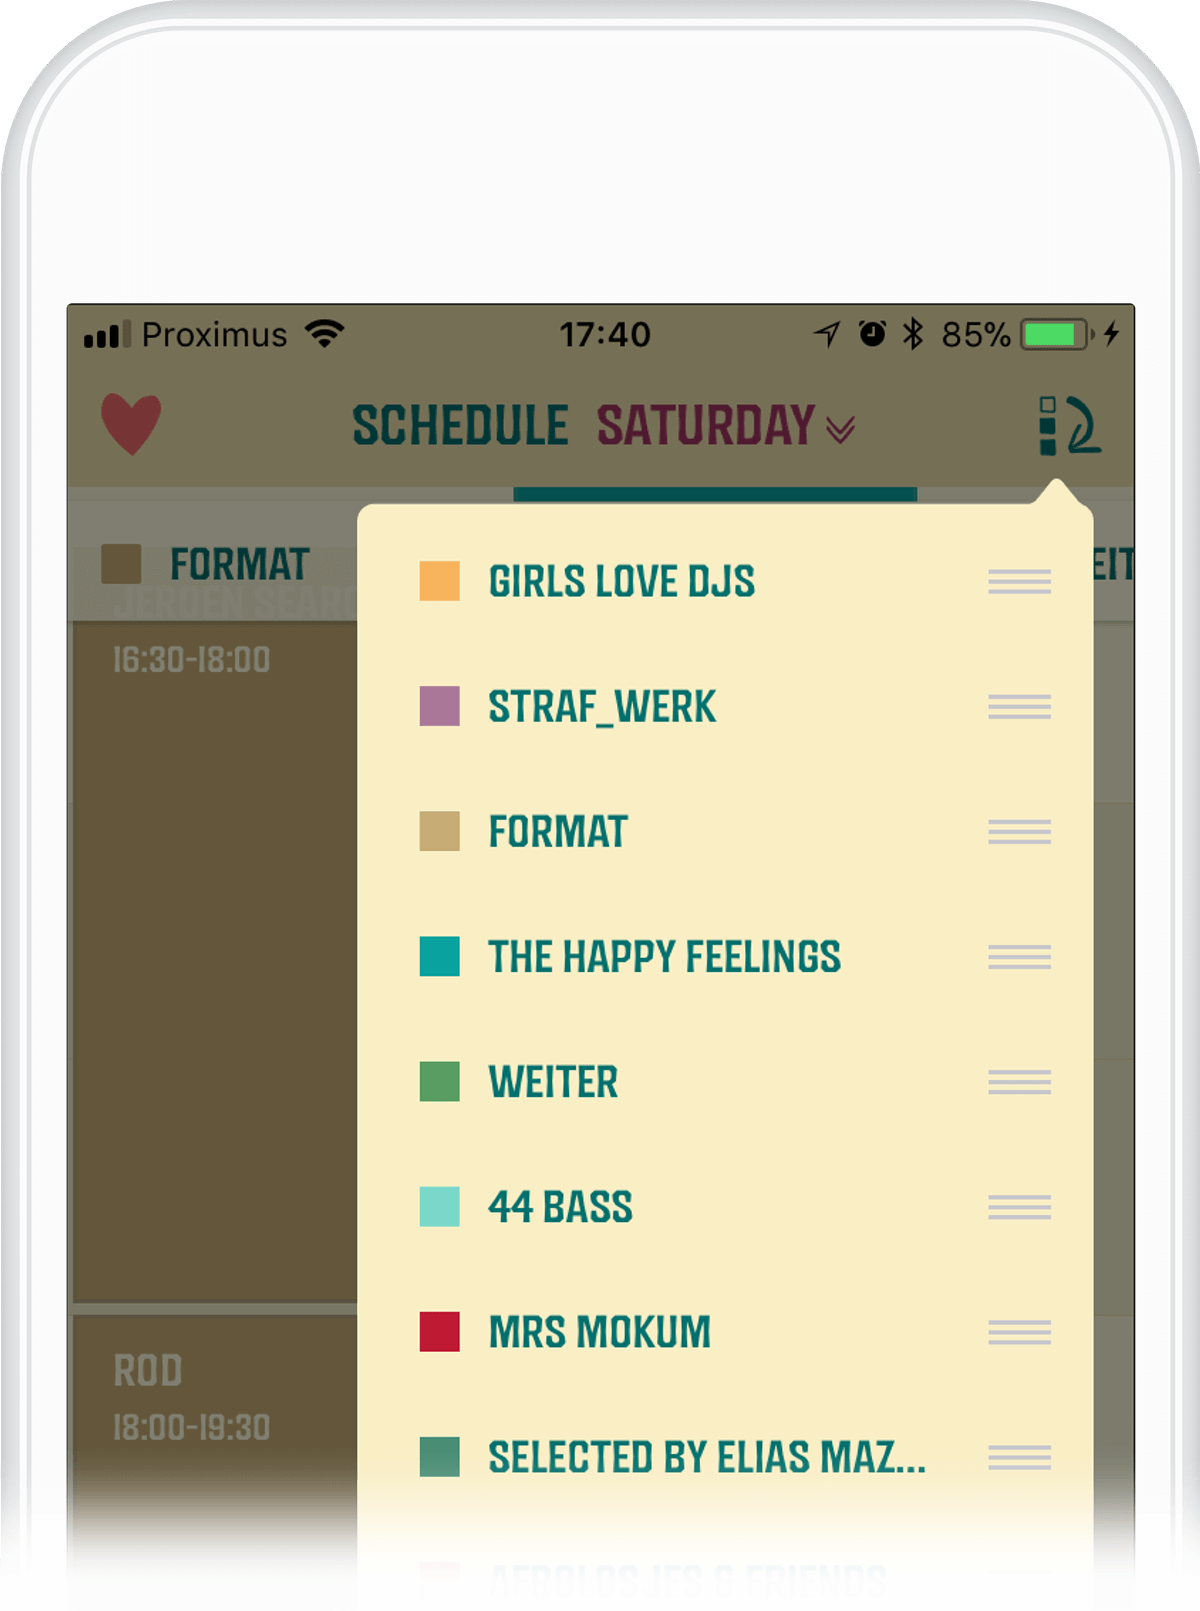 Users can select favourites to create their own personalized schedule and receive reminders before their favourite bands take the stage.